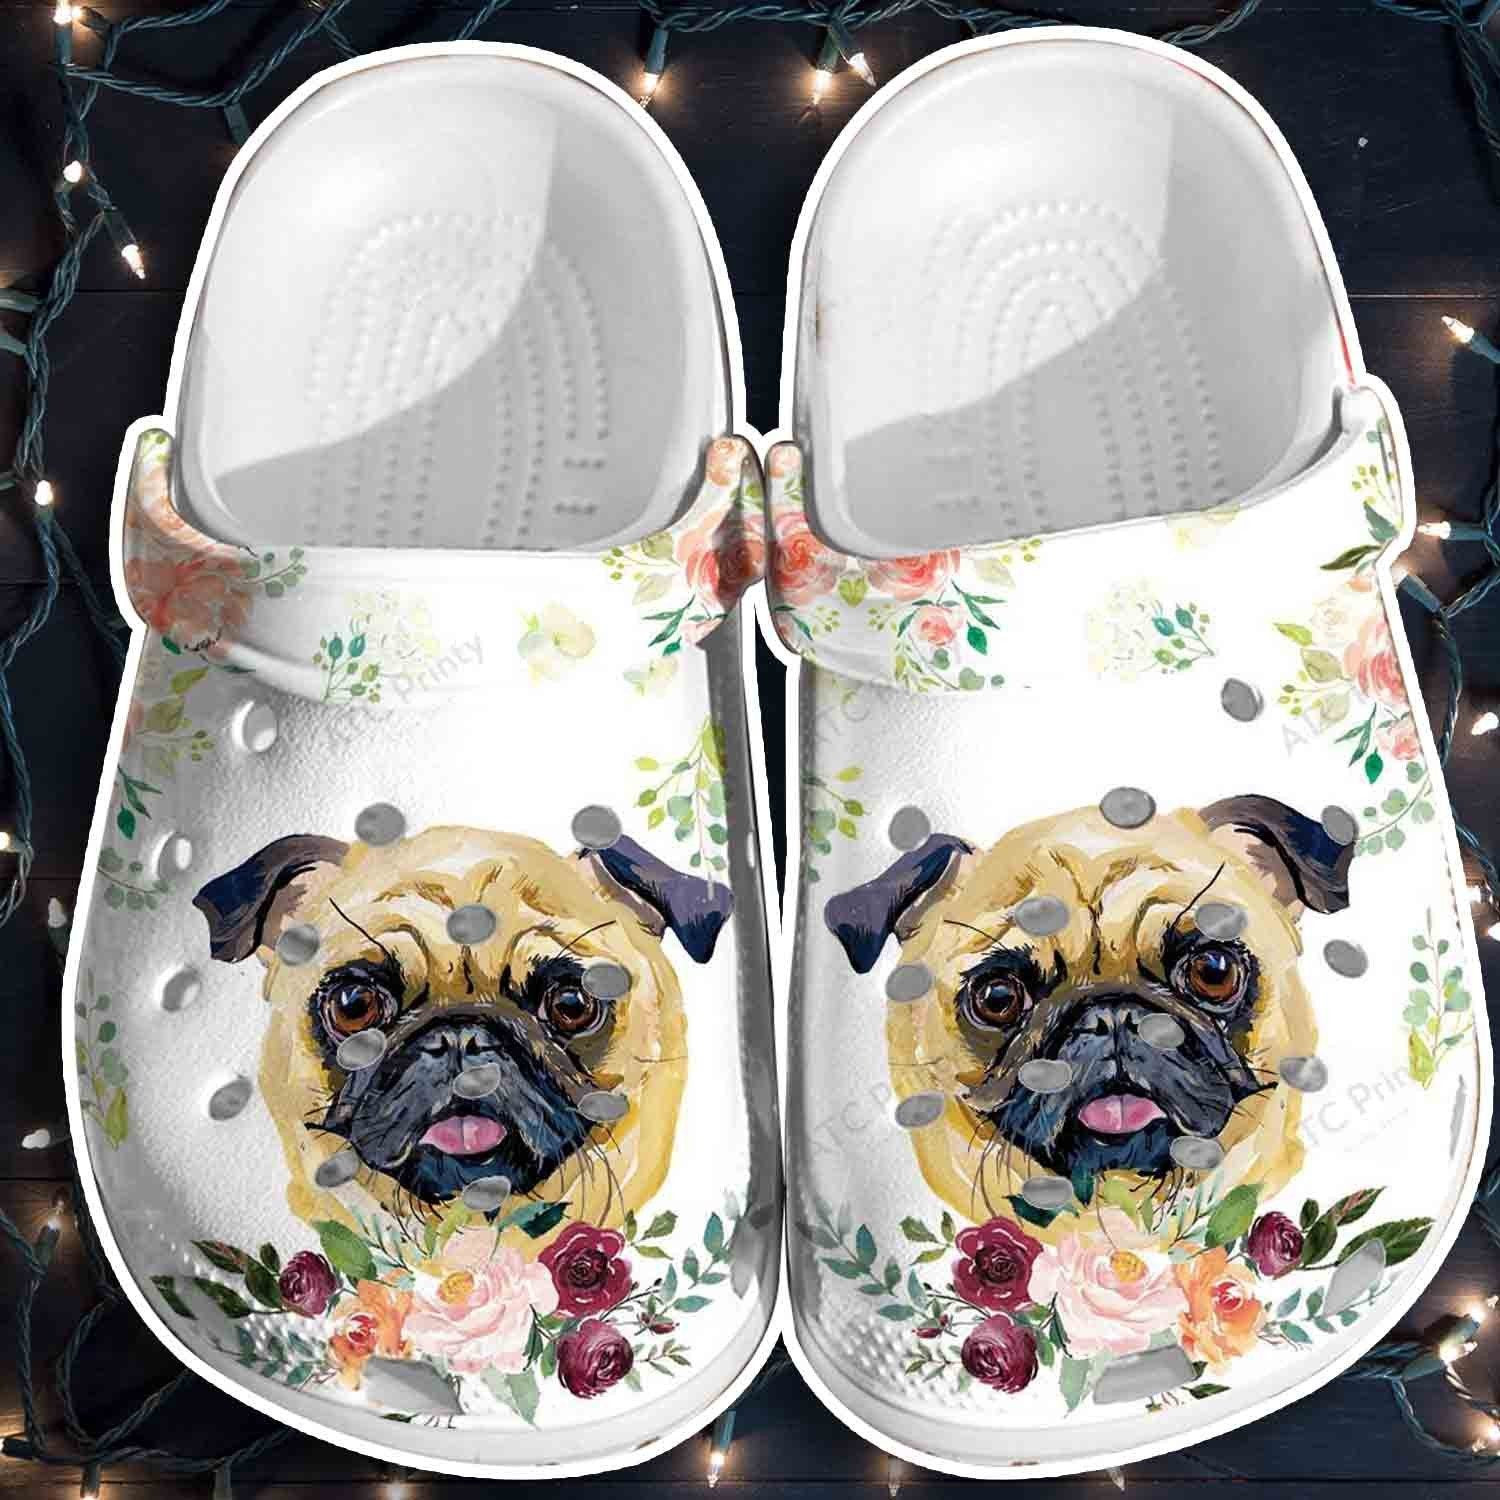 Adorable Pitbull Shoes - Roses Dog Crocs Clog Gifts For Mothers Day